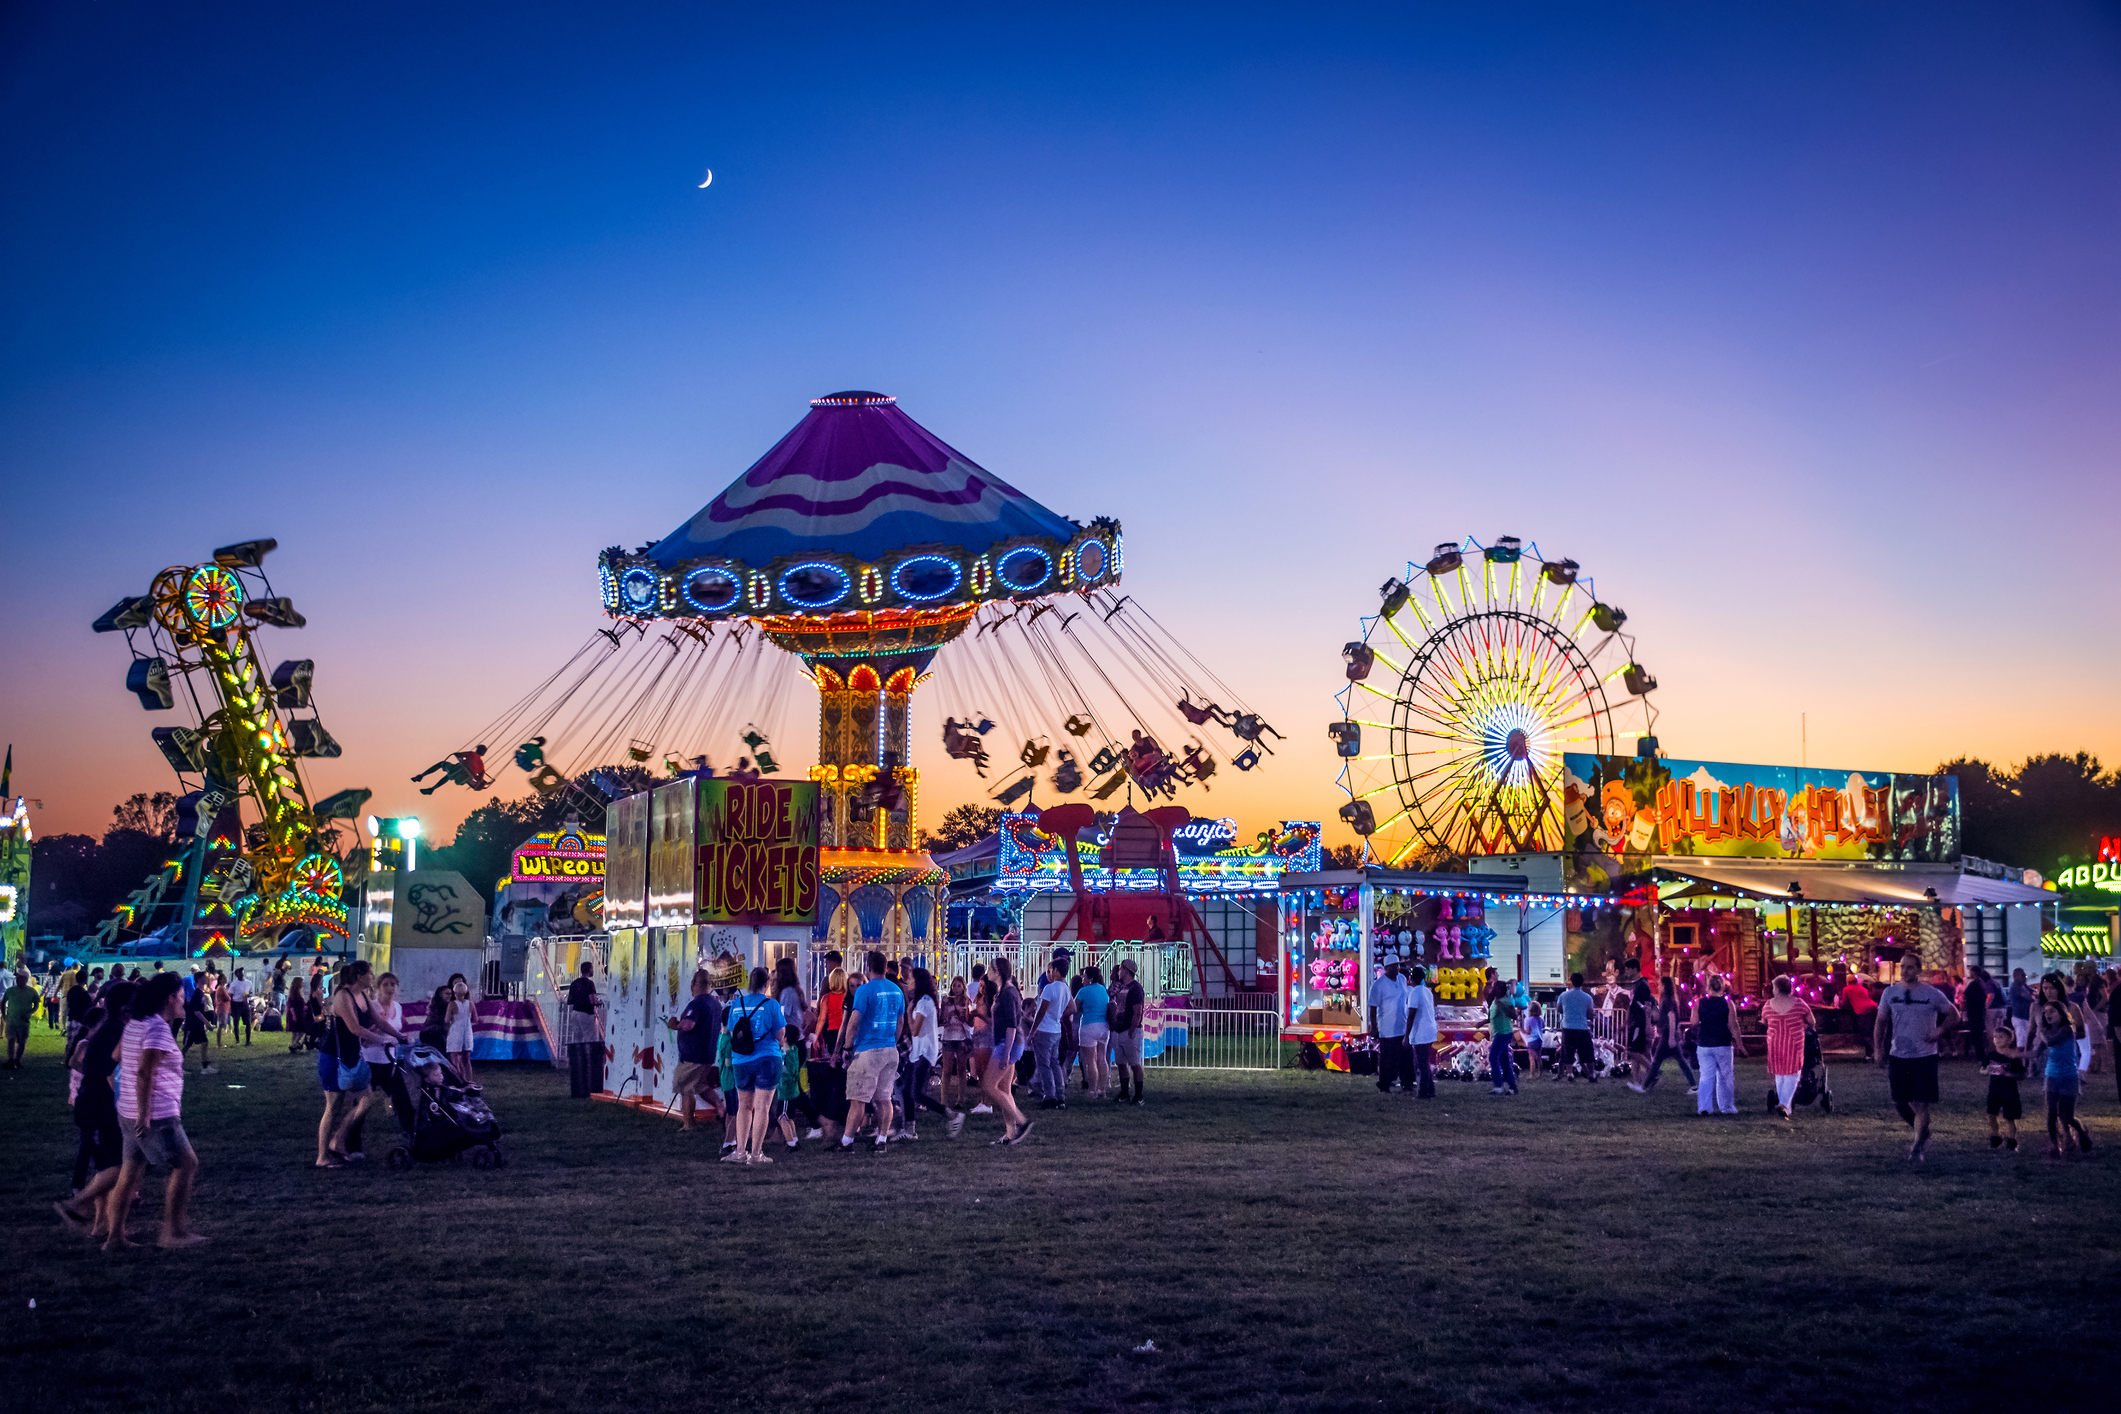 Wide shot of lighted carnival rides silhouetted against a dusk sky